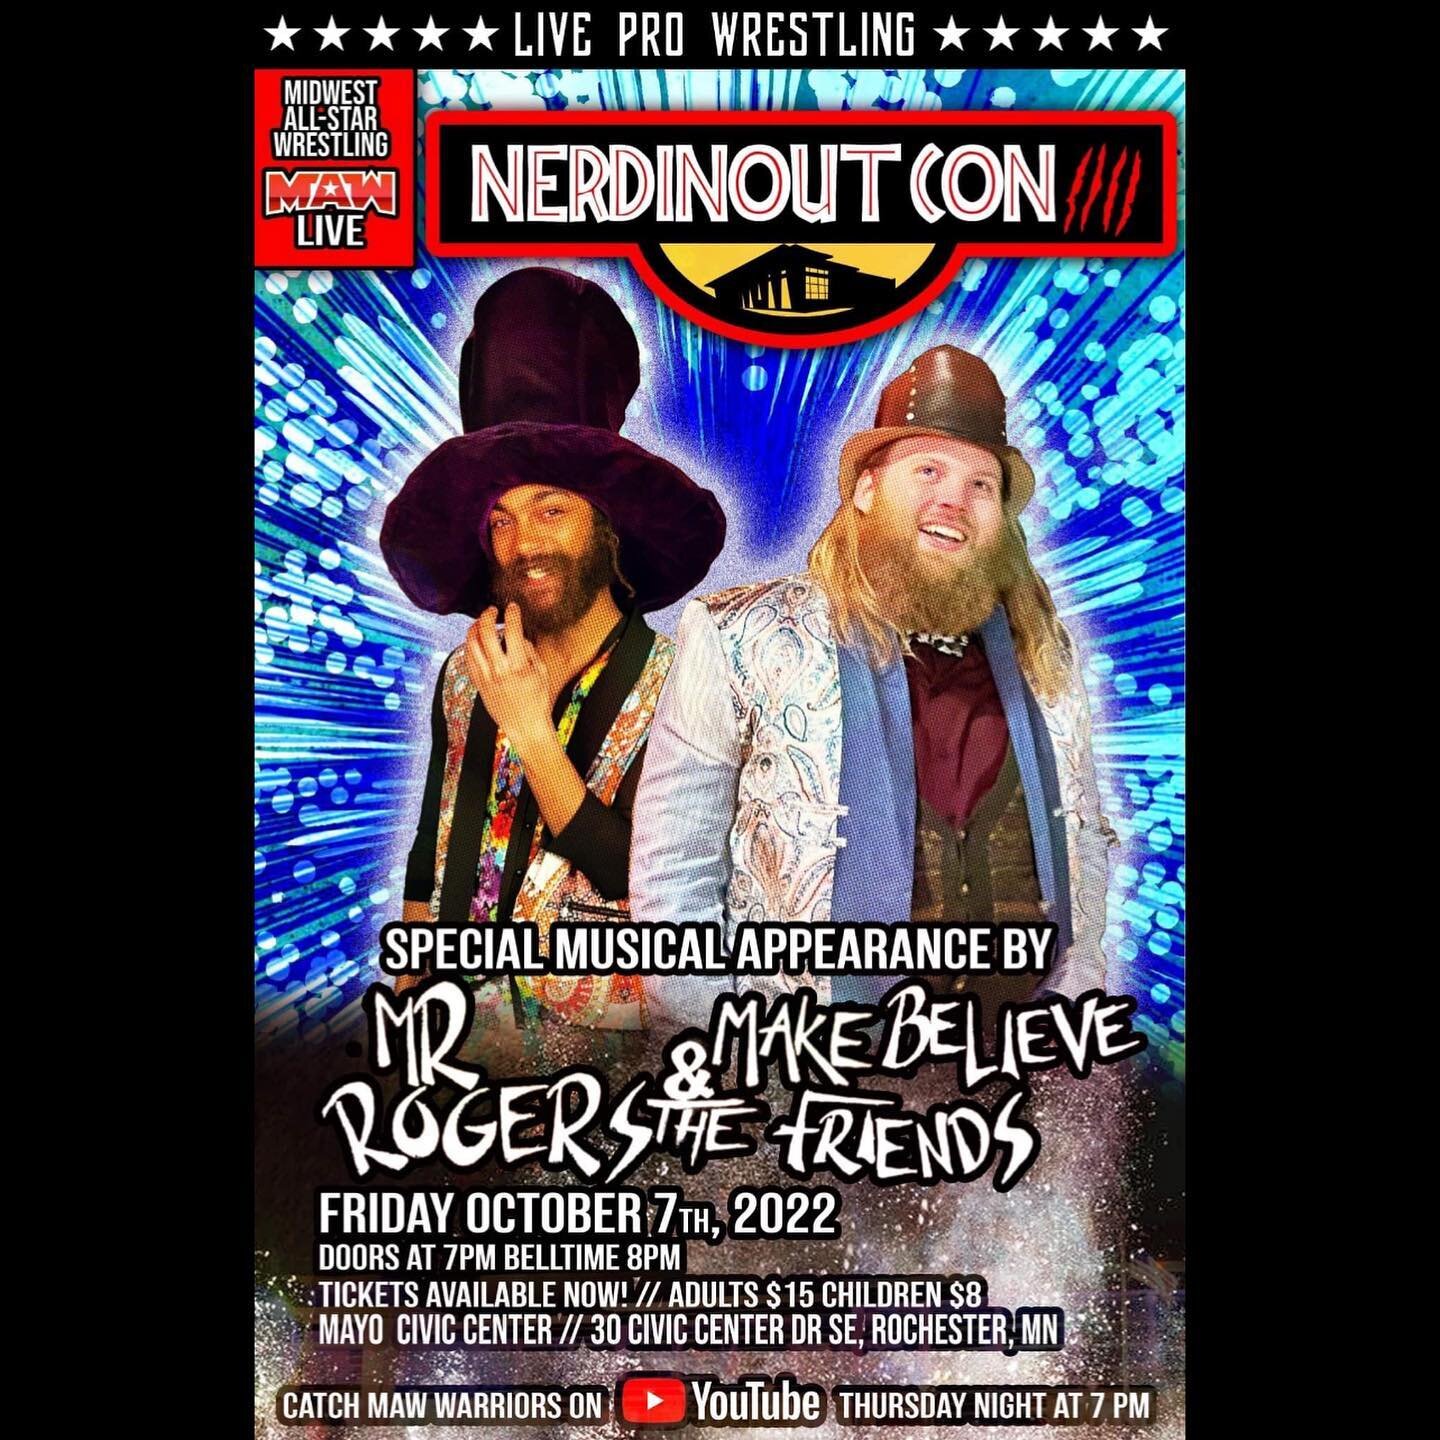 Yesss! This Friday Oct 7th I will be performing with my band @mrrogersmakebelievefriends during @mw_allstar live at @nerdinout_com Con! We will be rockin some tunes and supporting my amazing tag partners in The Schoolhouse of Rock &amp; Roll @leonard